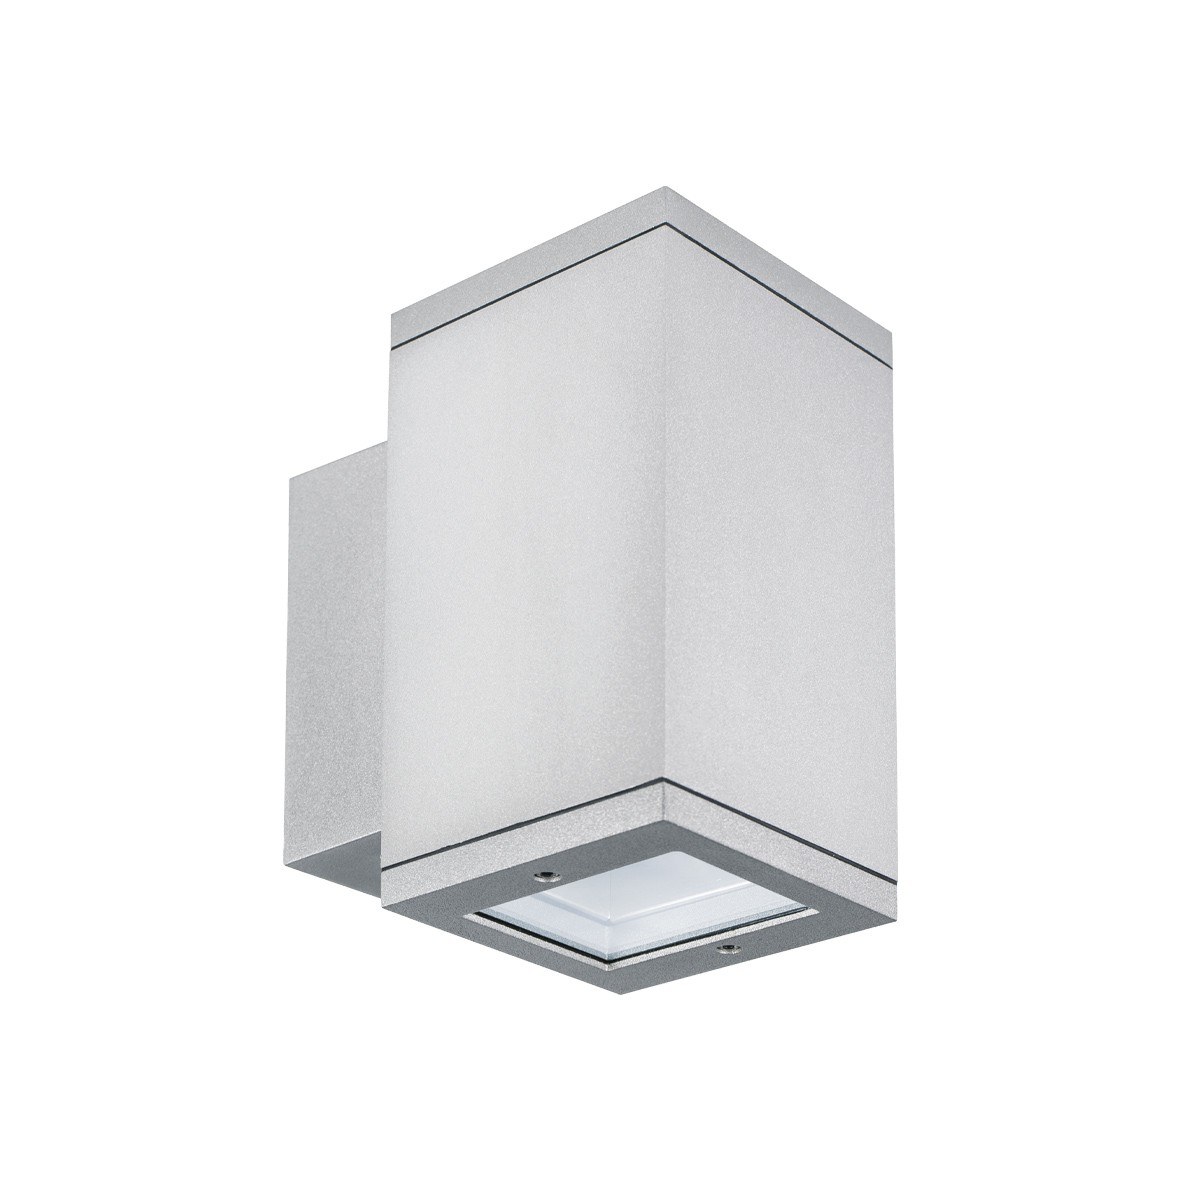 AVERY – LED WALL LAMPLED SQUARED 15,6W 3K GR